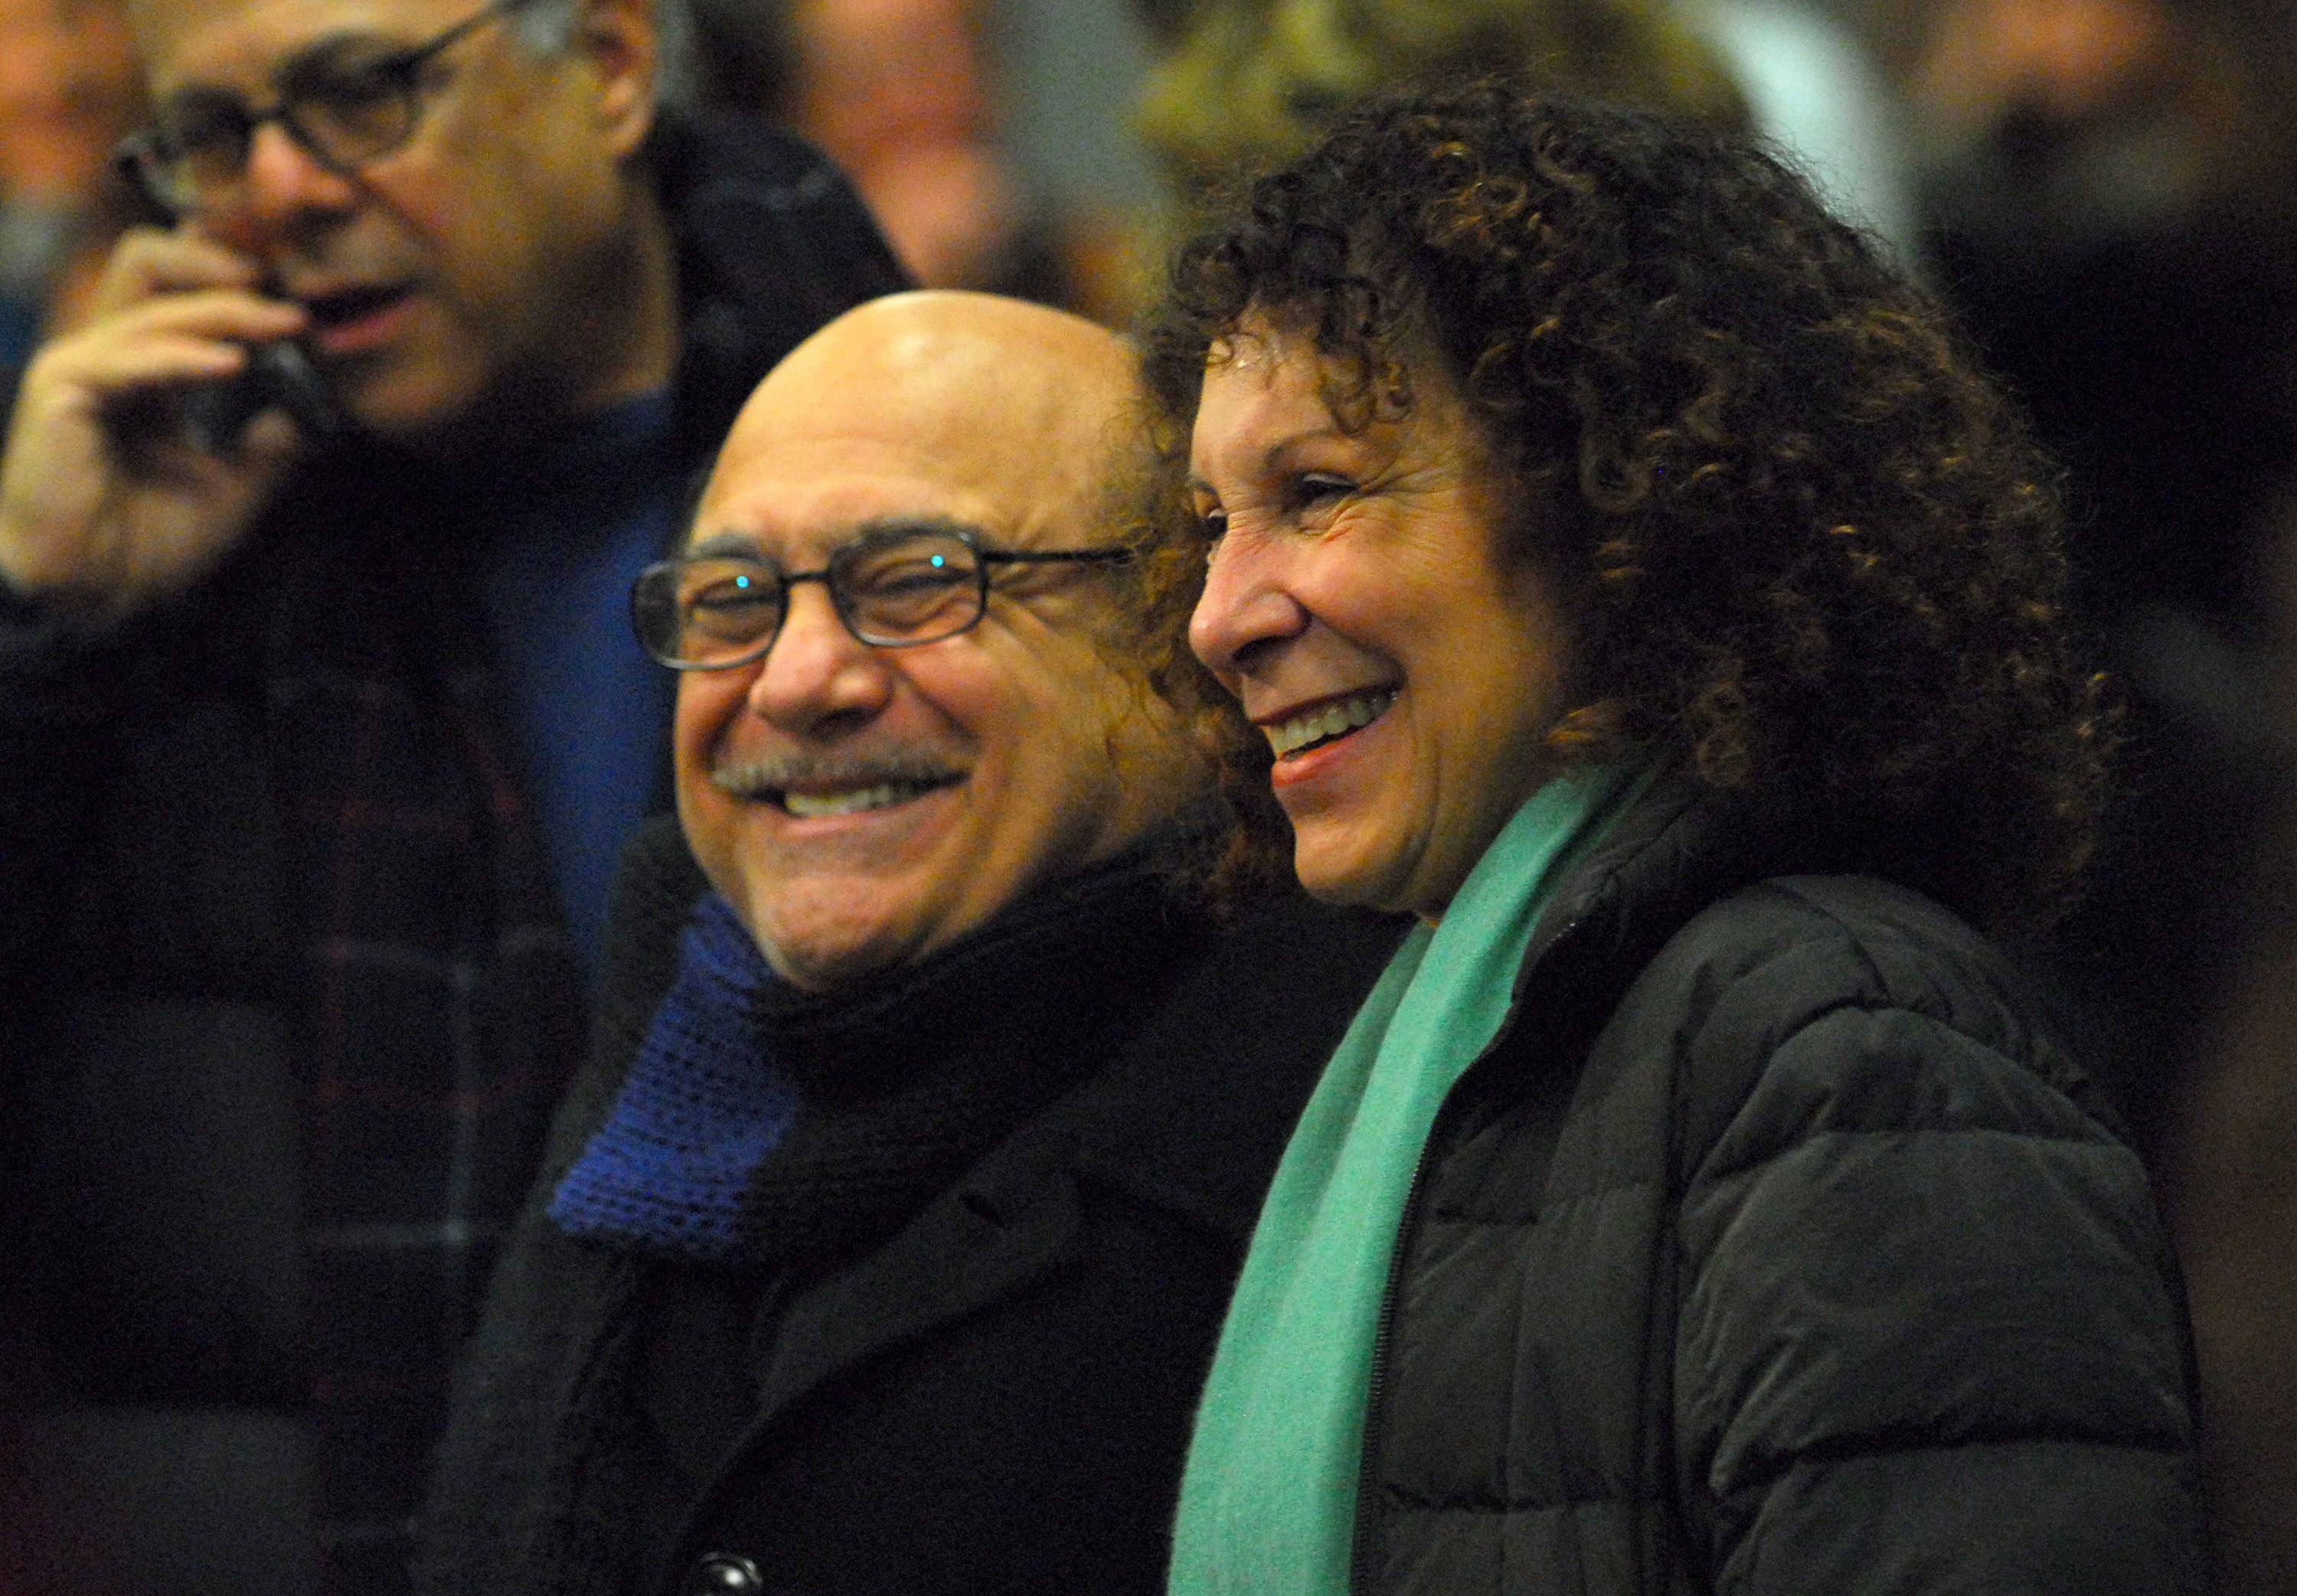 Danny DeVito and Rhea Perlman during 2007 Sundance Film Festival - "The Good Night" premiere at Eccles in Park City, Utah. Photo: Getty Images